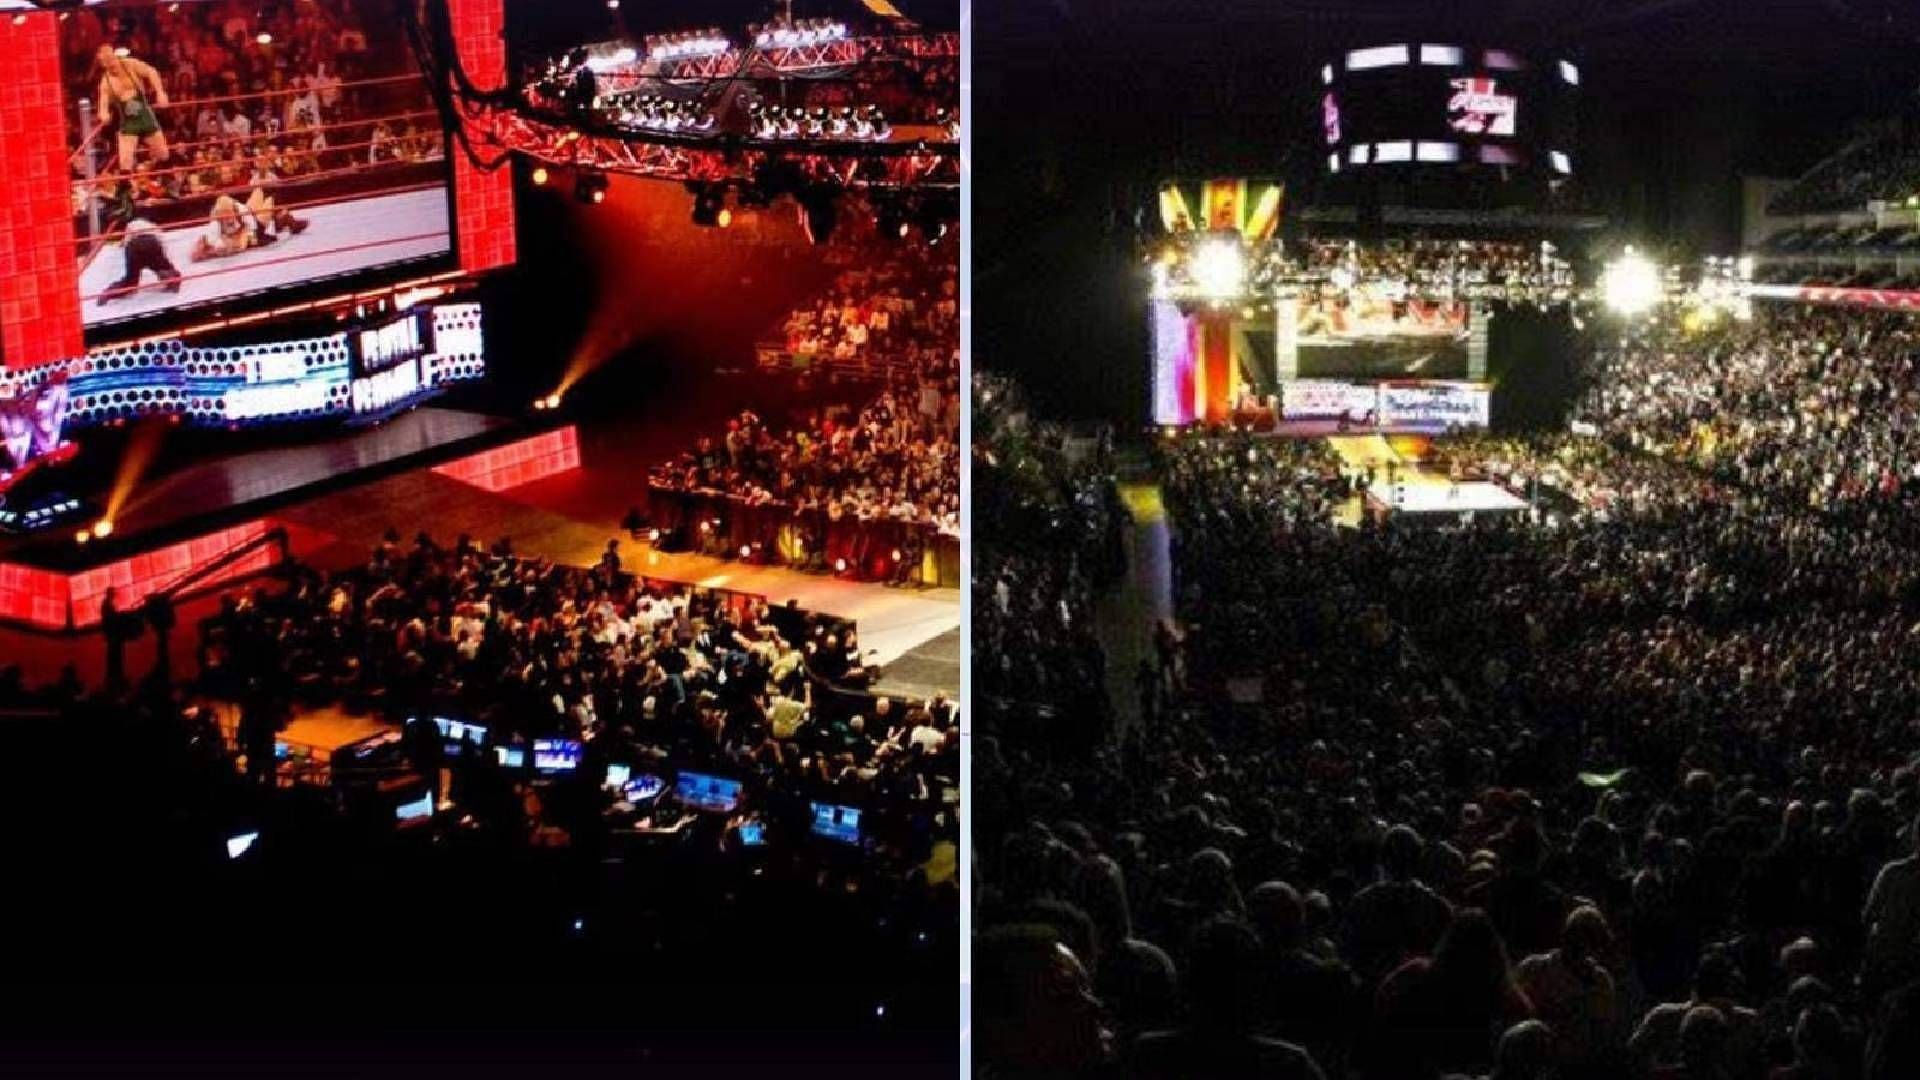 WWE stage